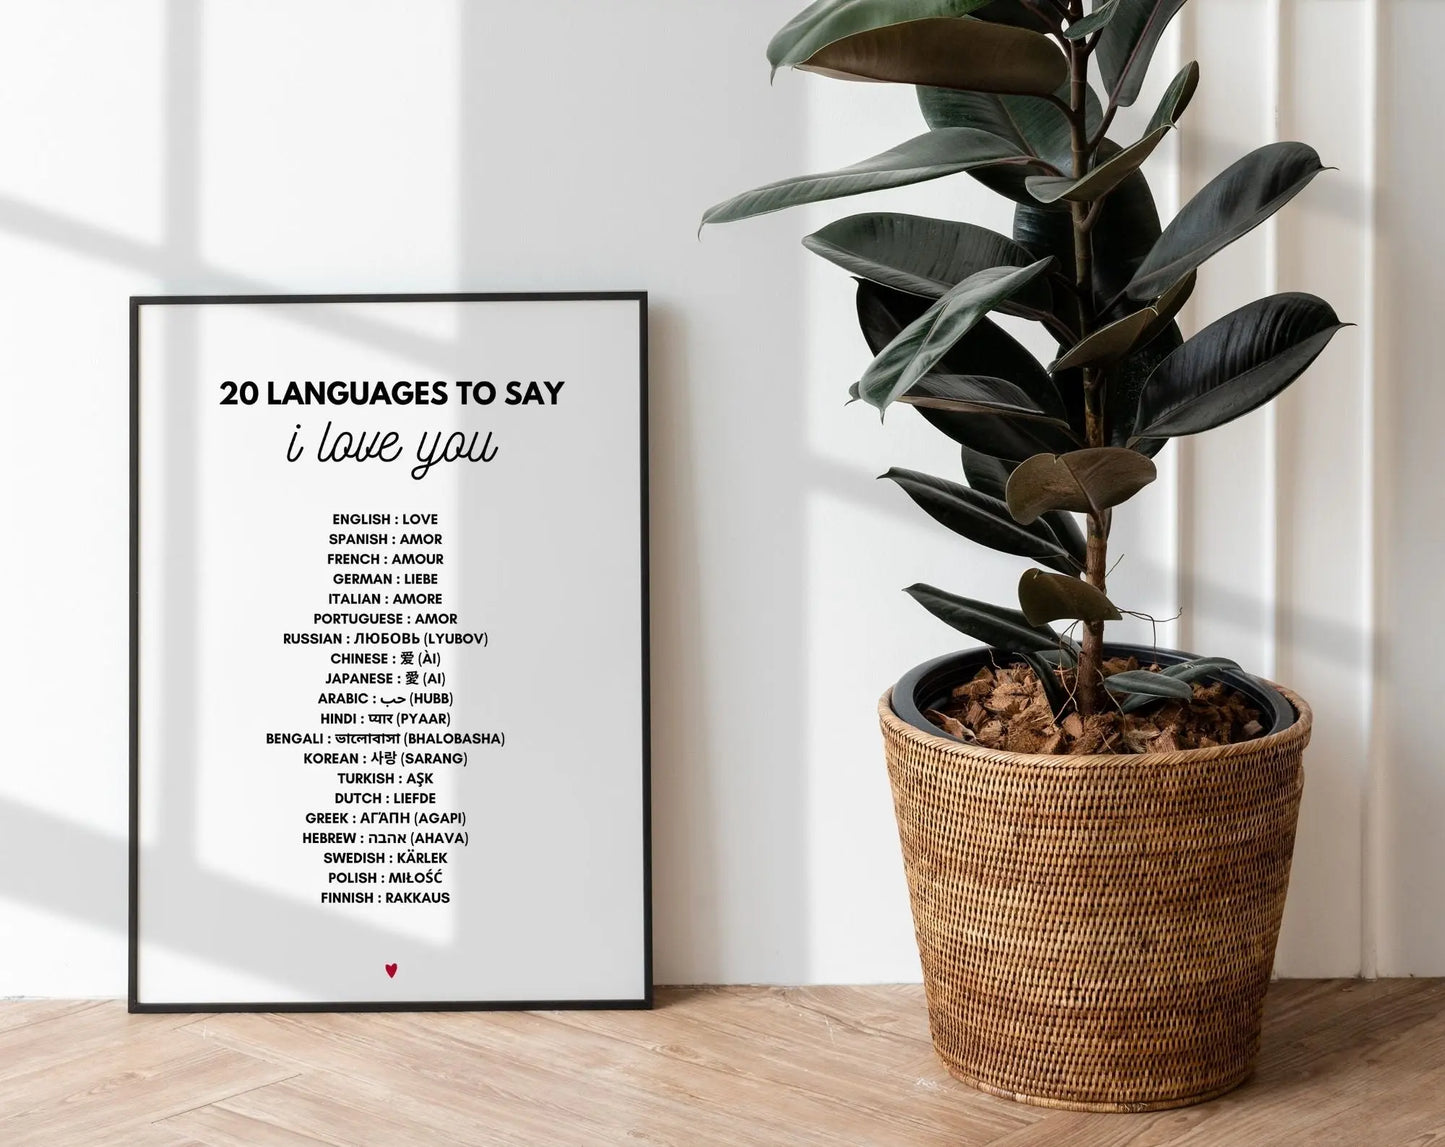 How to say "I love you" in 20 languages Love poster - Wall art -  Trendy prints - Valentine's Day gift - Digital Printable poster FLTMfrance FLTMfrance